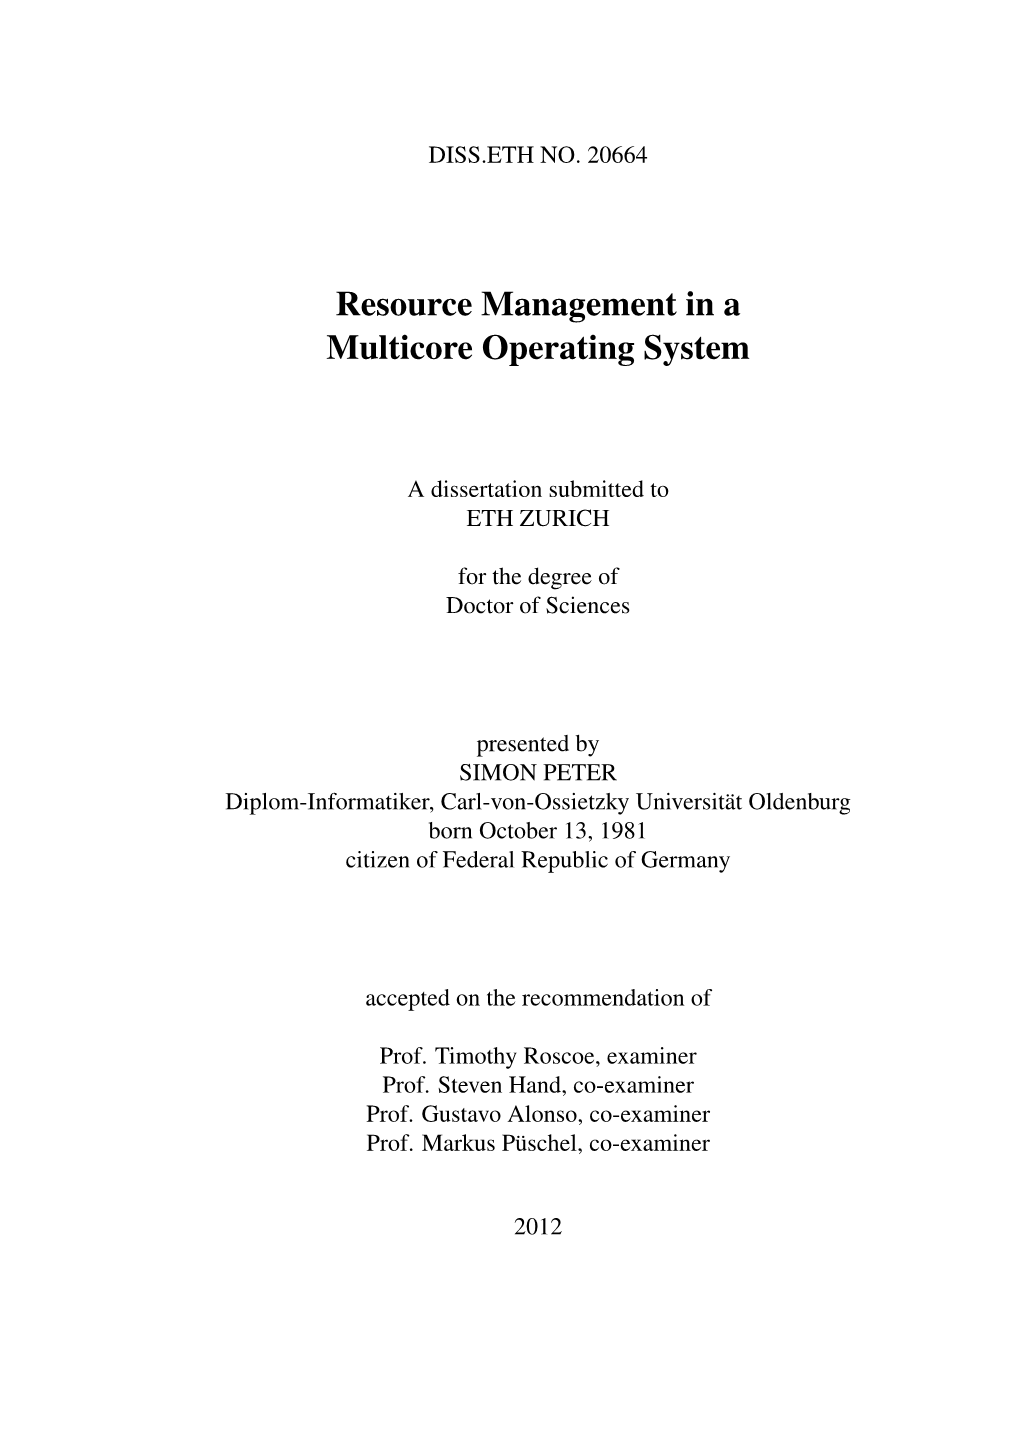 Resource Management in a Multicore Operating System